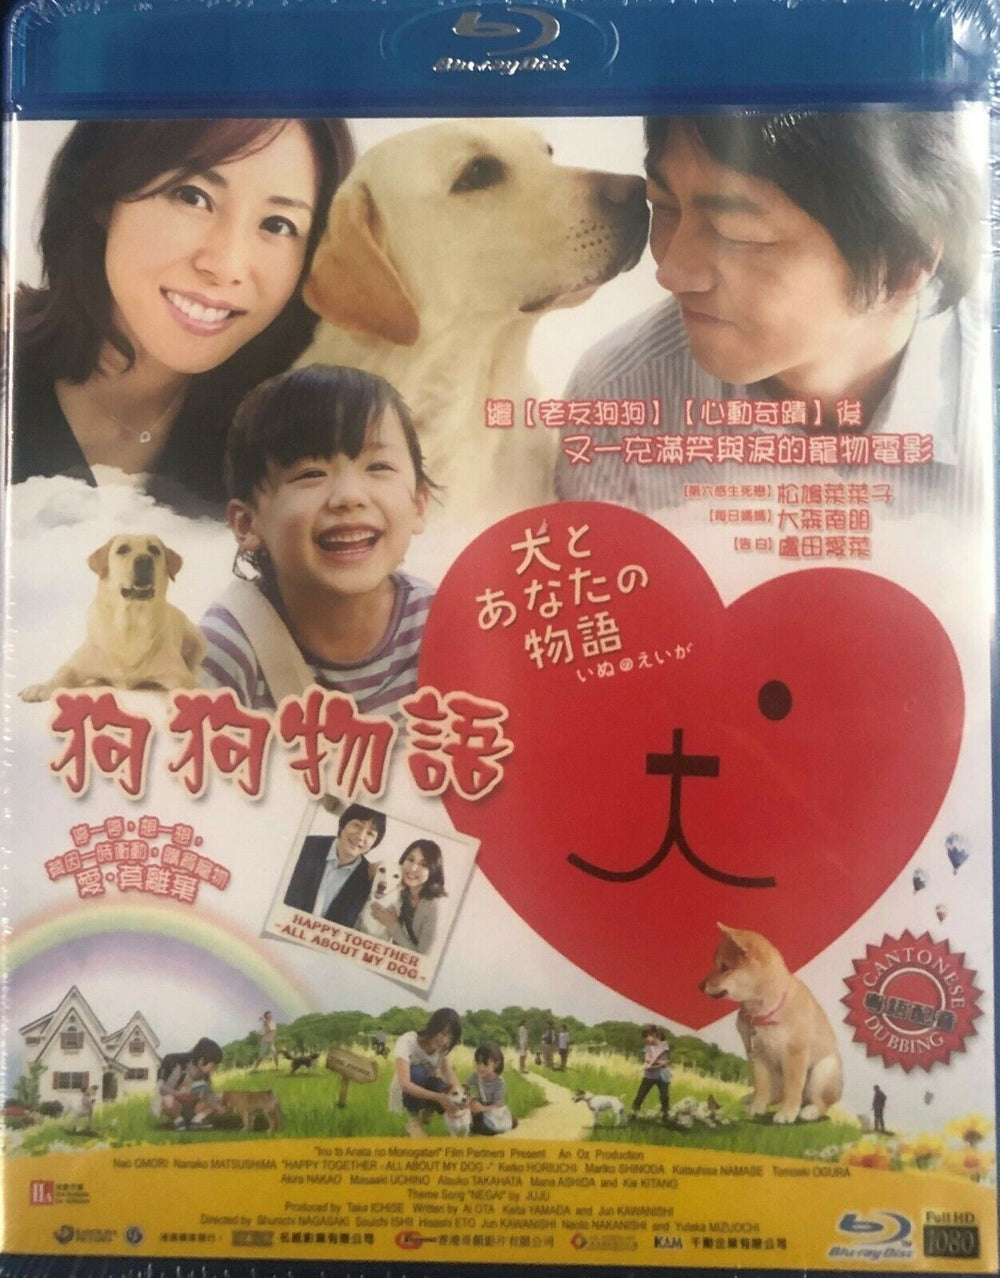 Happy Together-All About My Dog 狗狗物語 (Japanese Movie) BLU-RAY with English Sub (Region A)